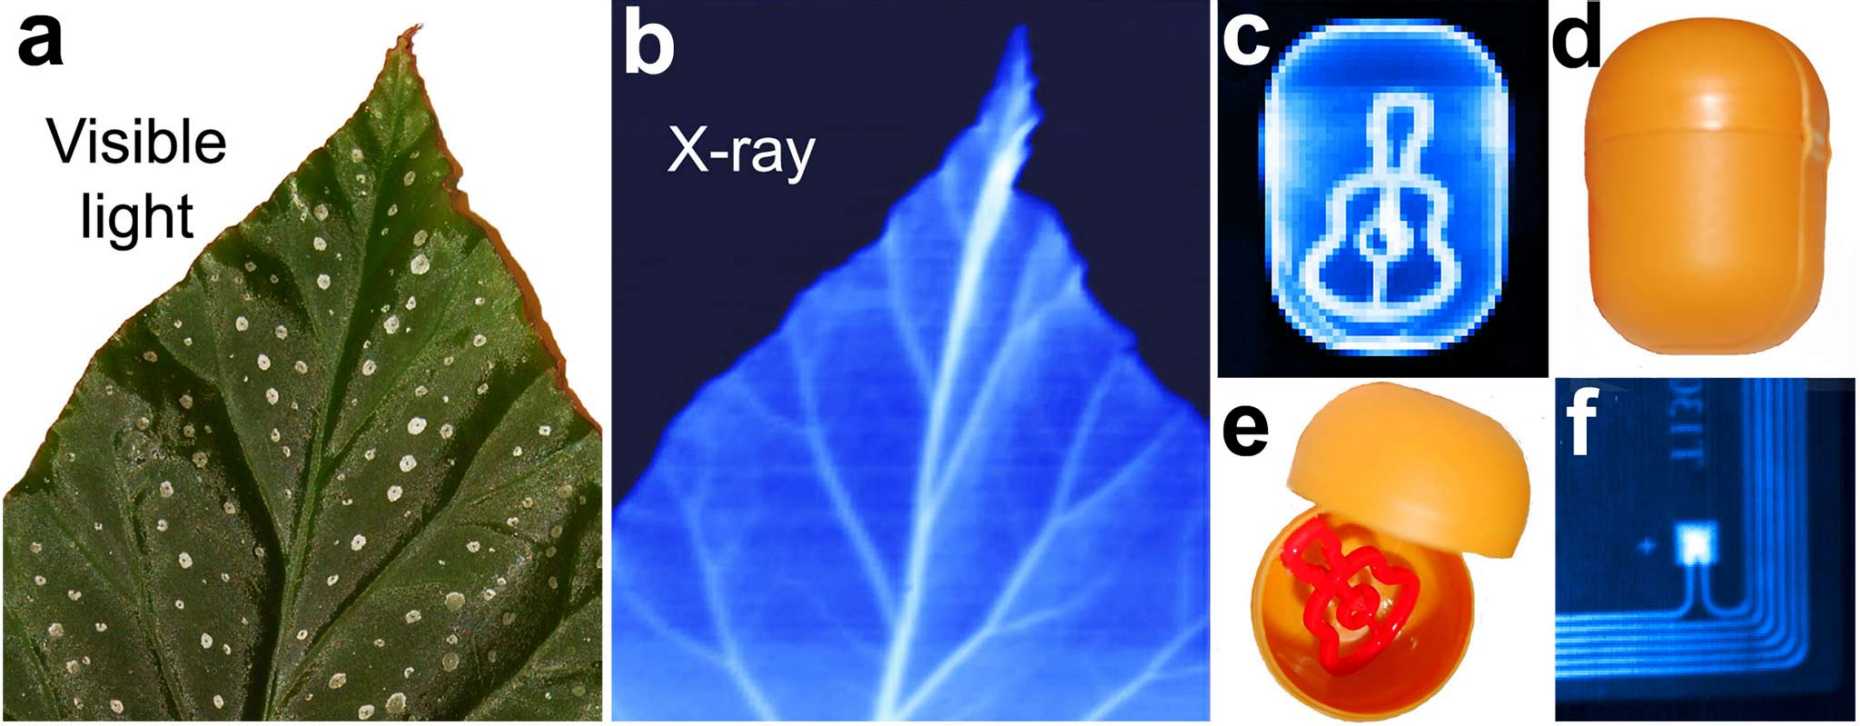 Enlarged view: Well-resolved X-ray images of various objects. A leaf of Begonia obliqua (d), and X-ray image thereof (e); a small guitar hidden in a Kinder Surprise egg (f-h); and an electronic key card (i) unveiling the near field antenna and microchip inside.